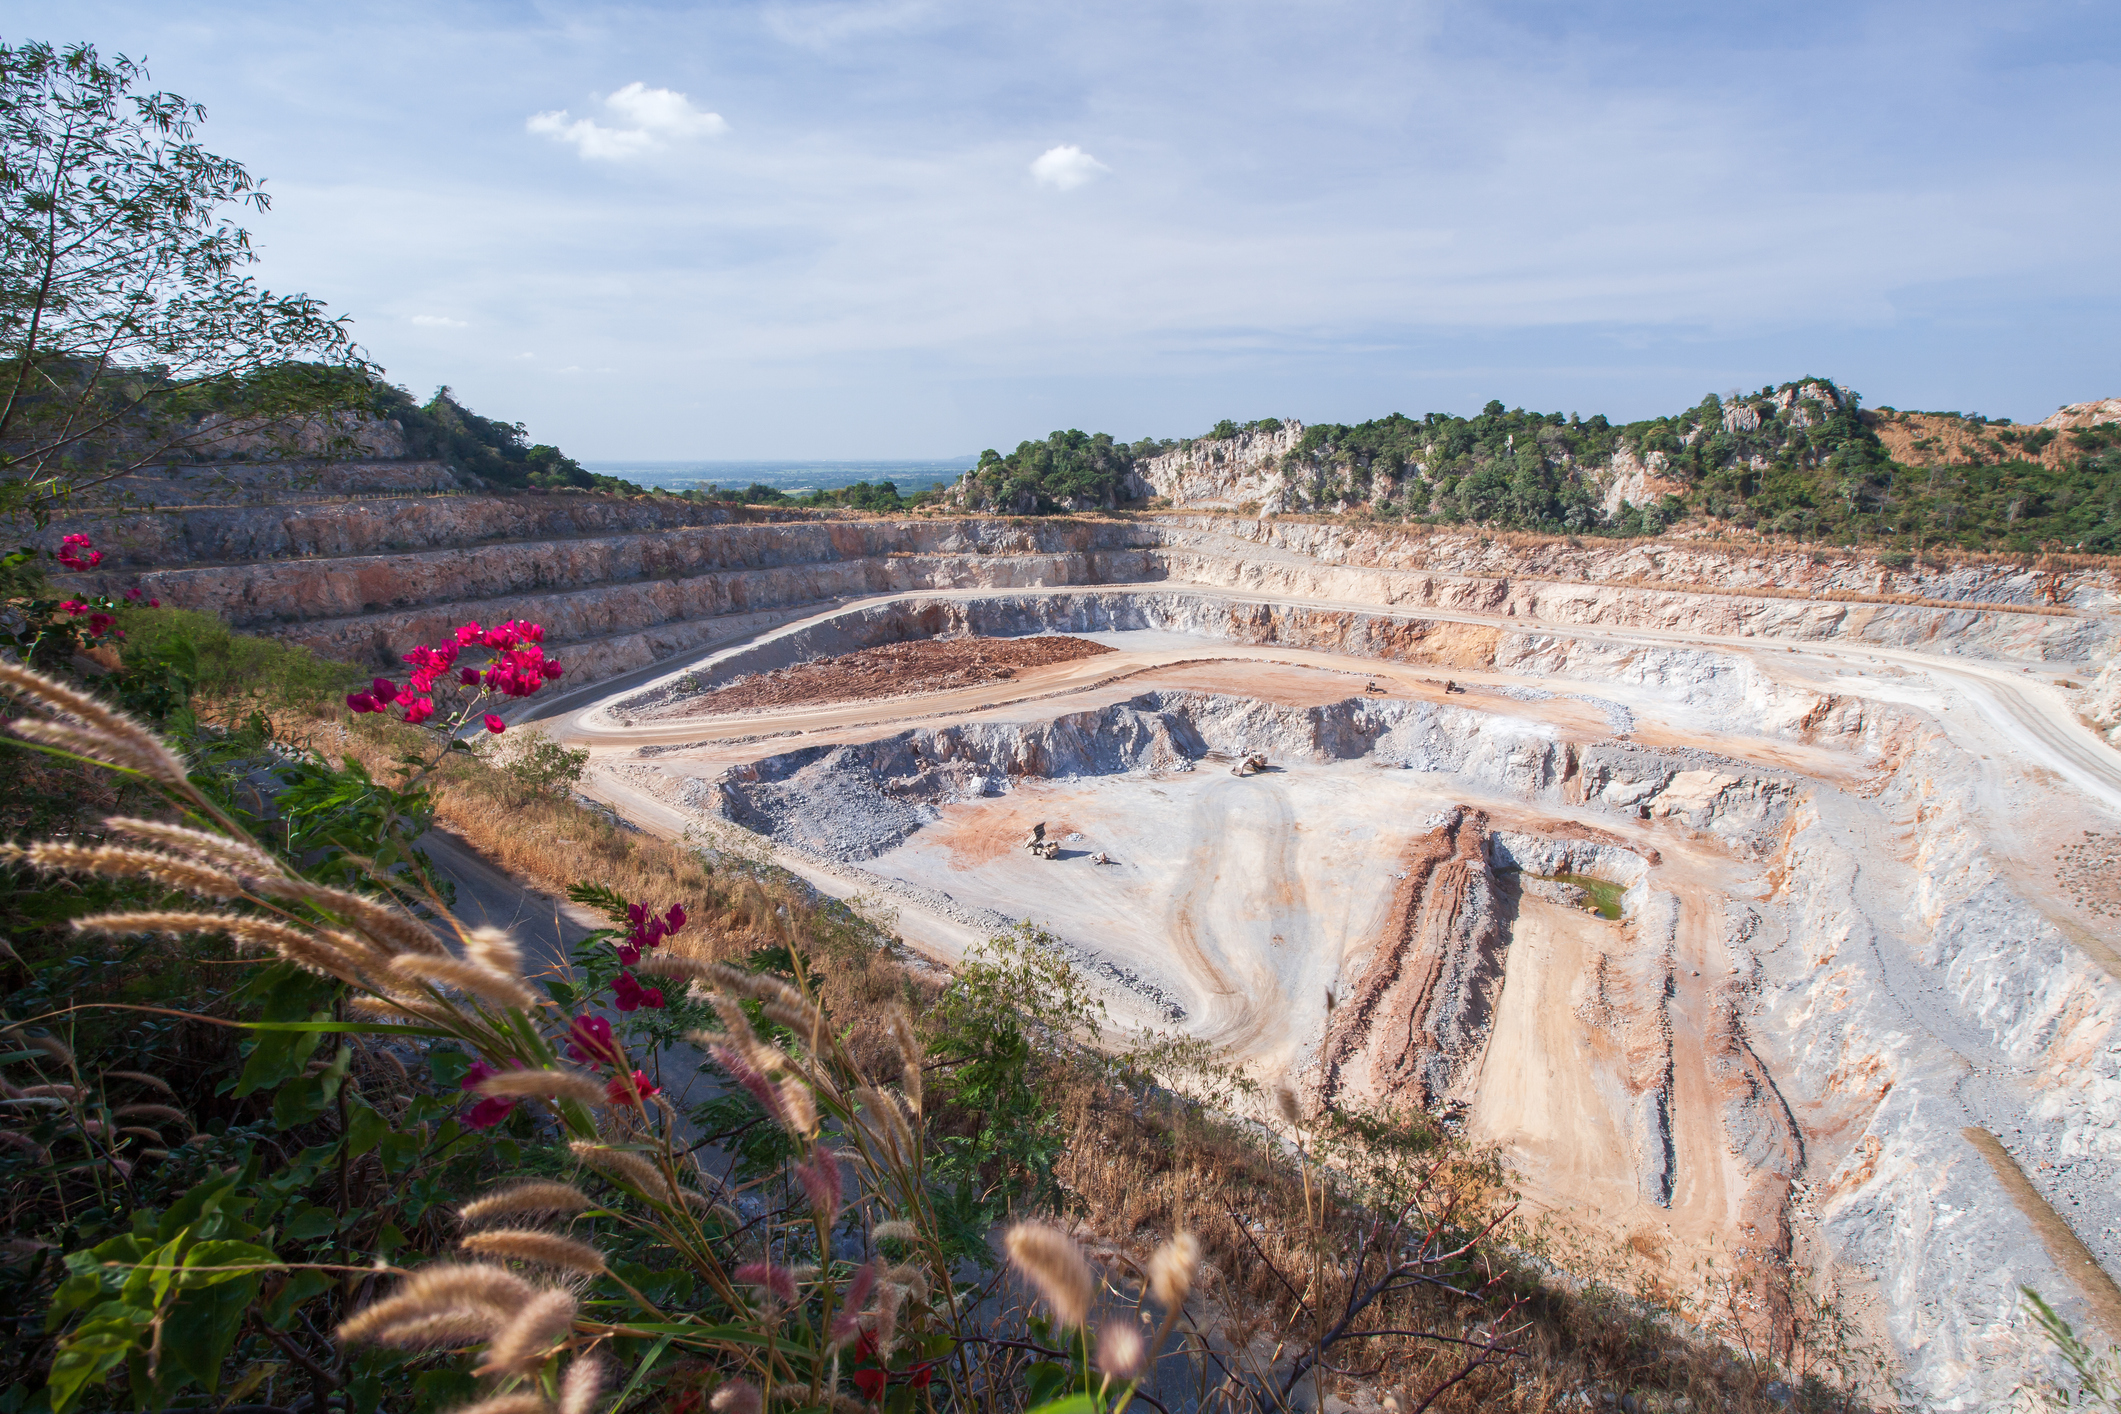 By 2030, 70% of all nickel units will come from Indonesia and 67% of cobalt resources from the Democratic Republic of Congo